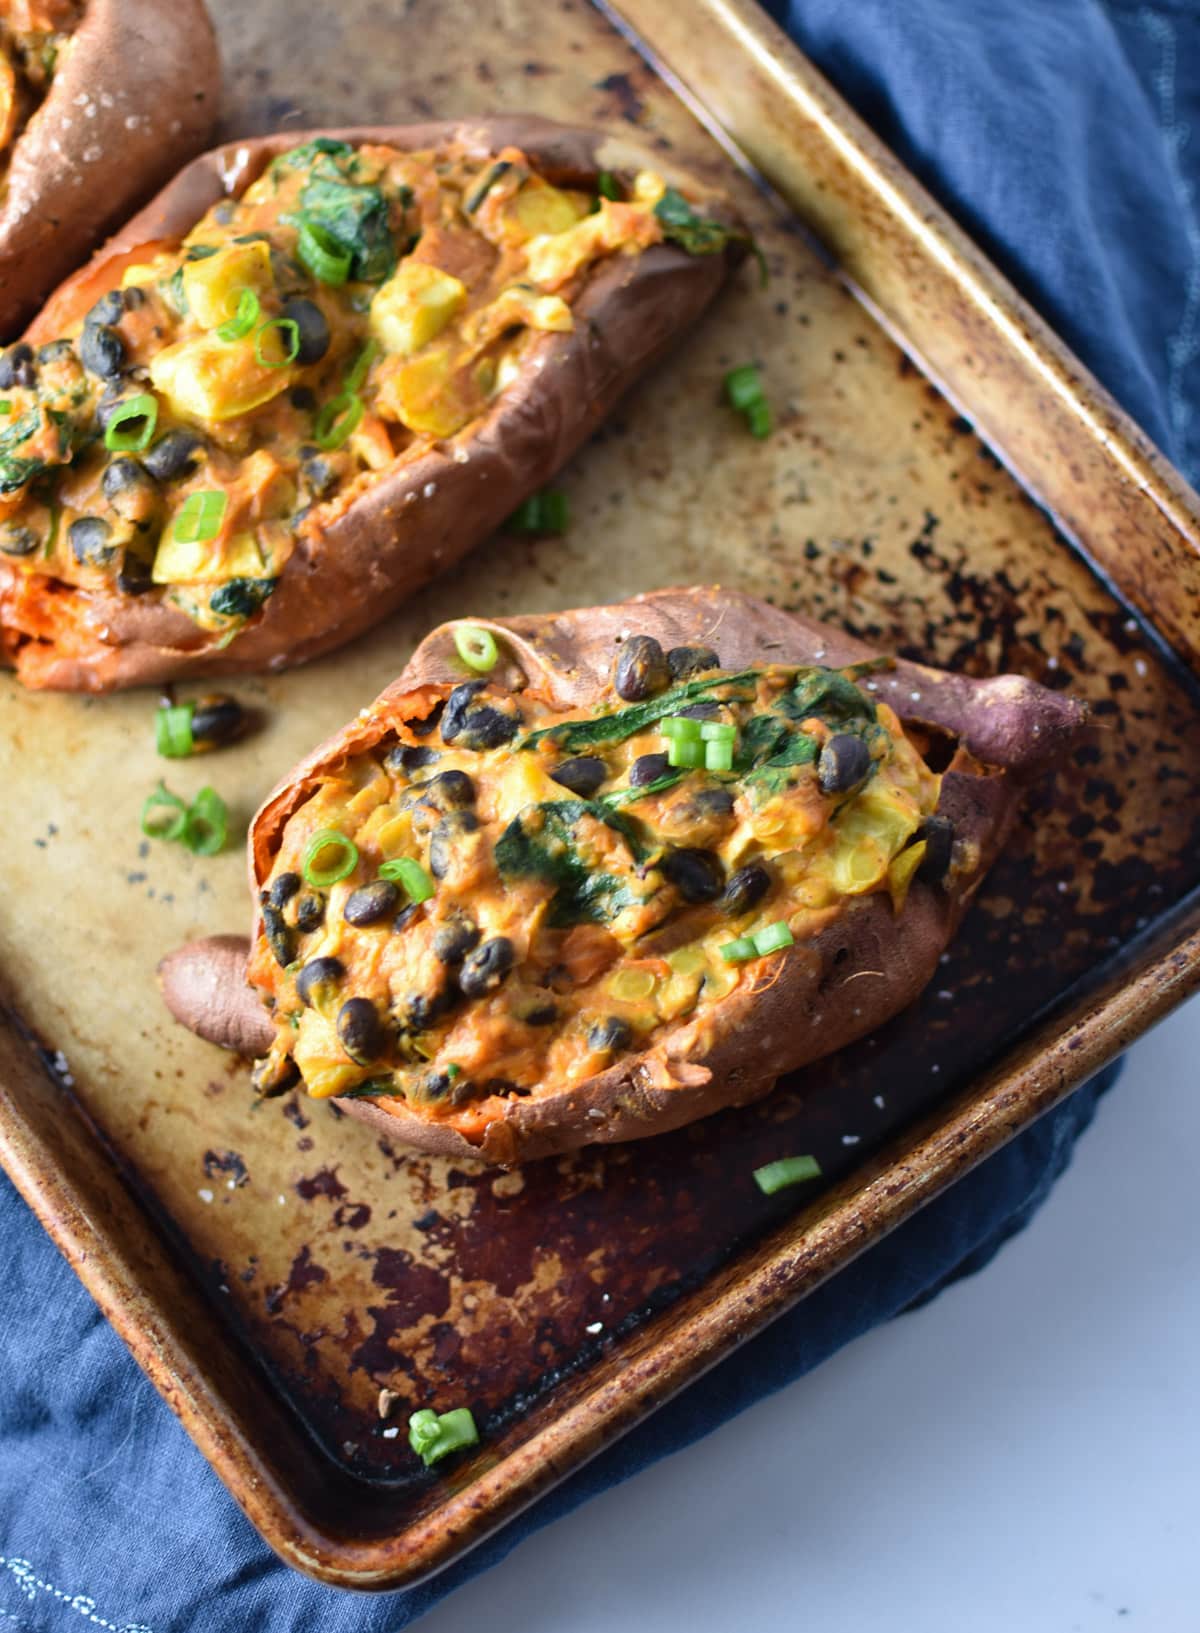 A stuffed sweet potato with Mexican-style filling topped with enchilada sauce on a baking sheet